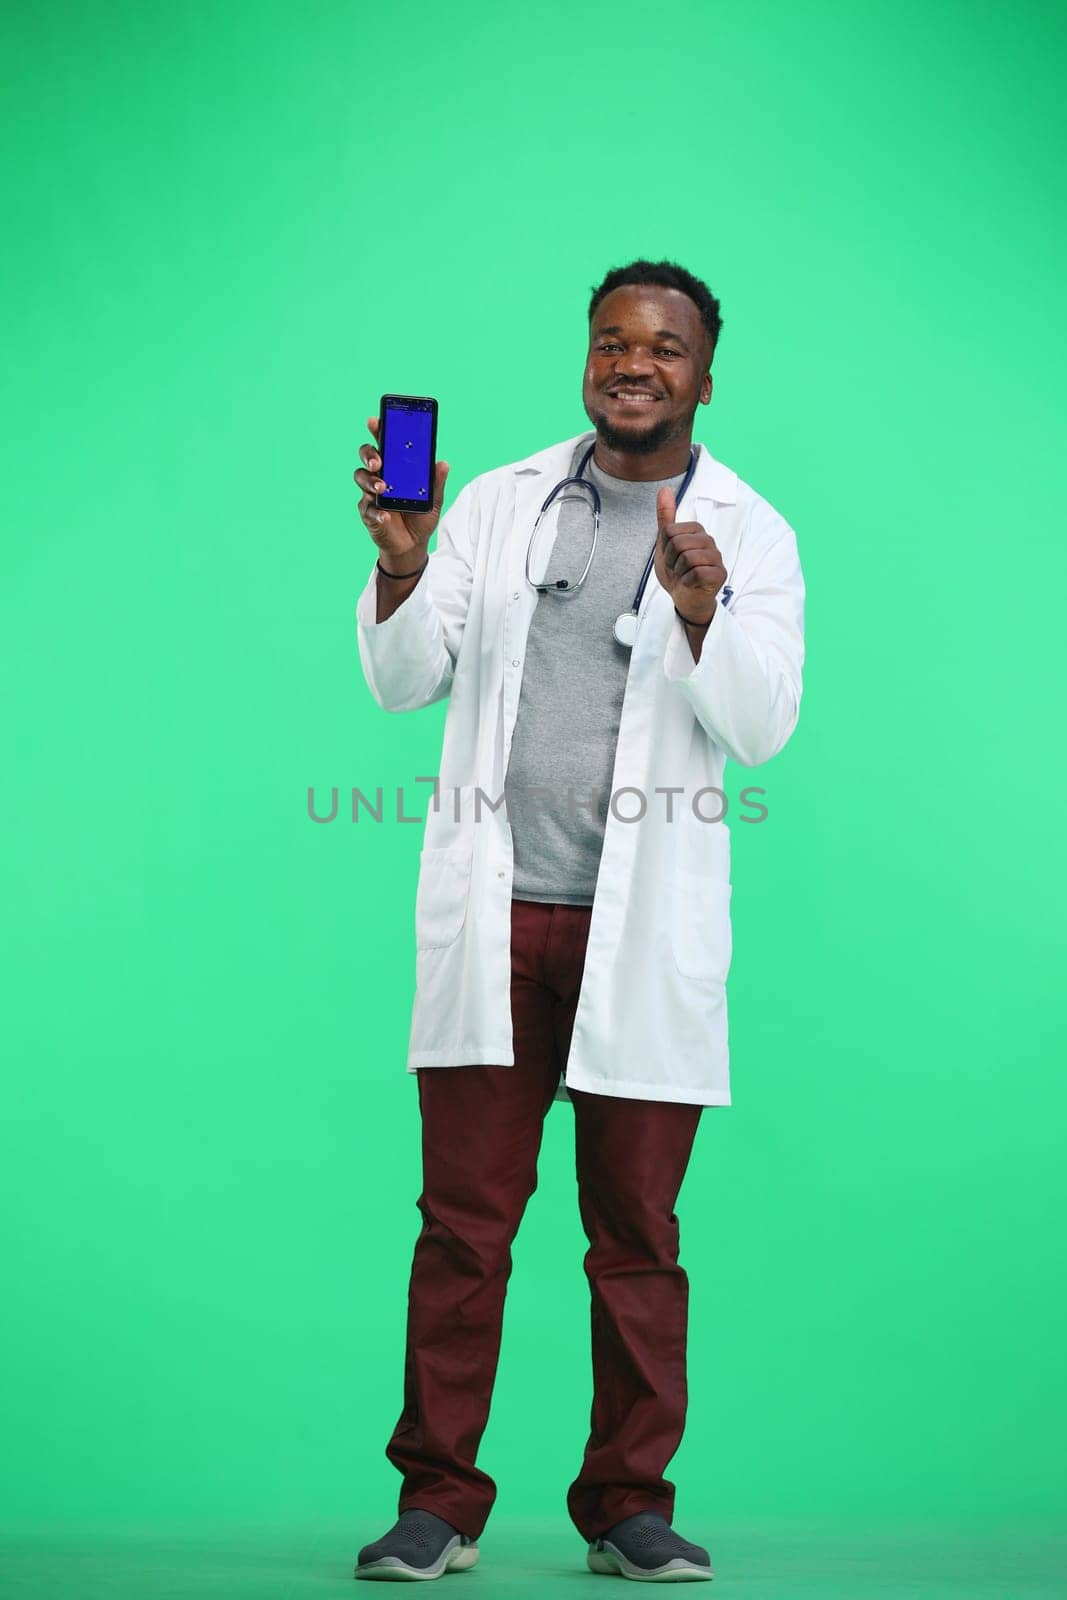 The doctor, in full height, on a green background, shows the phone.